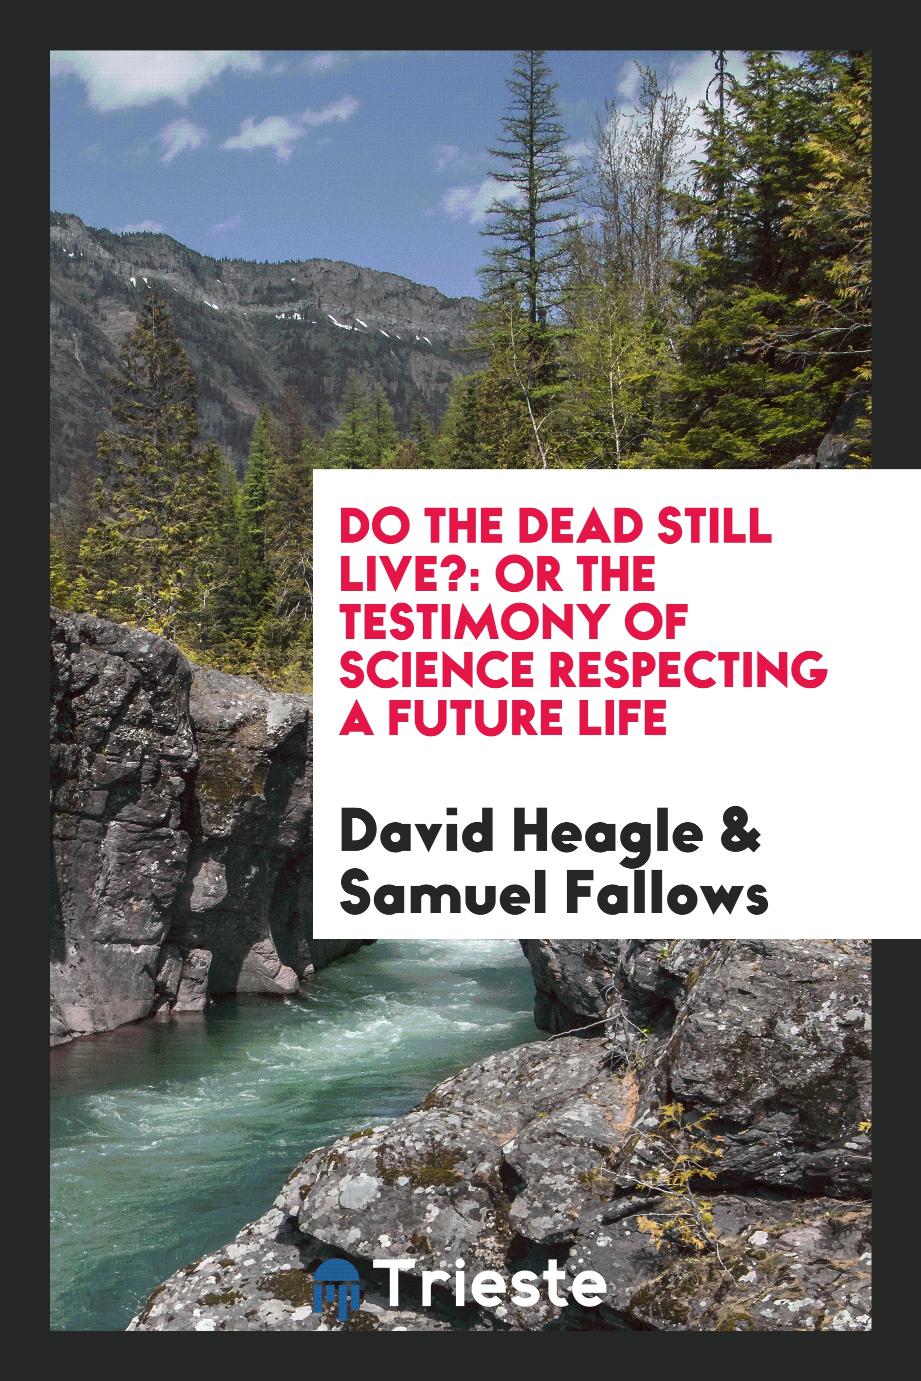 Do the Dead Still Live?: Or the Testimony of Science Respecting a Future Life